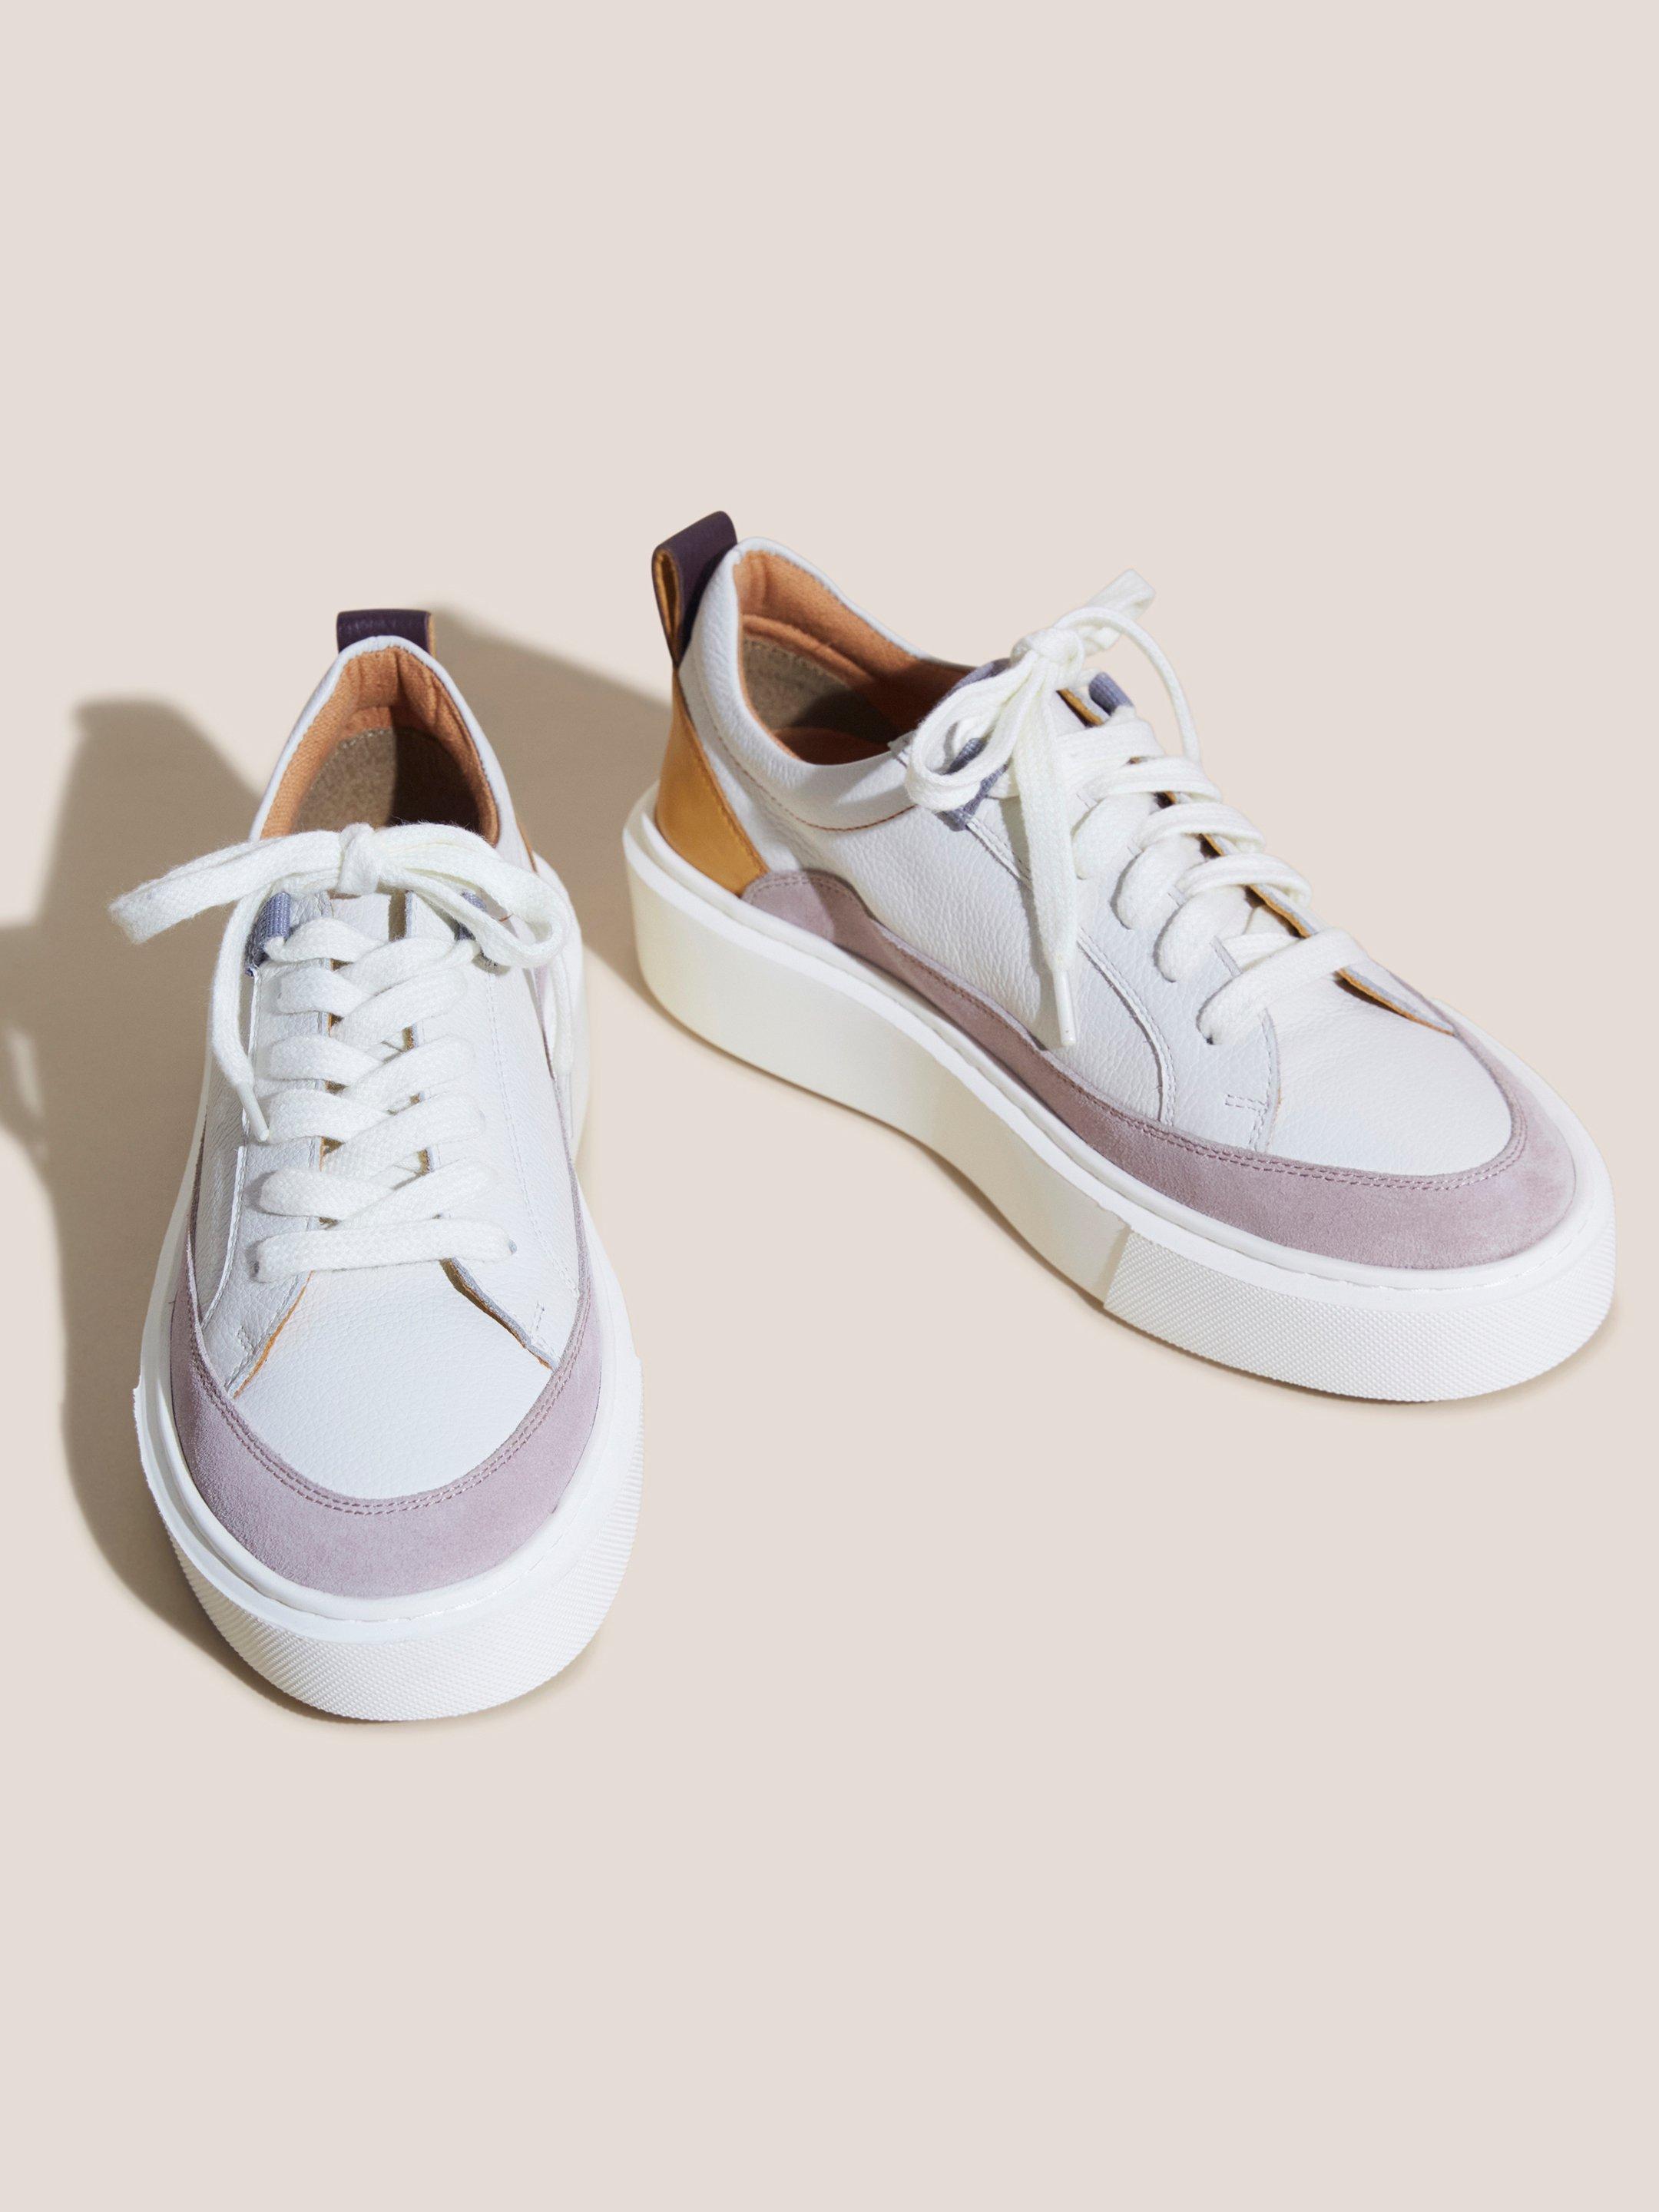 XL Extralight Leather Trainer in WHITE MLT - FLAT BACK